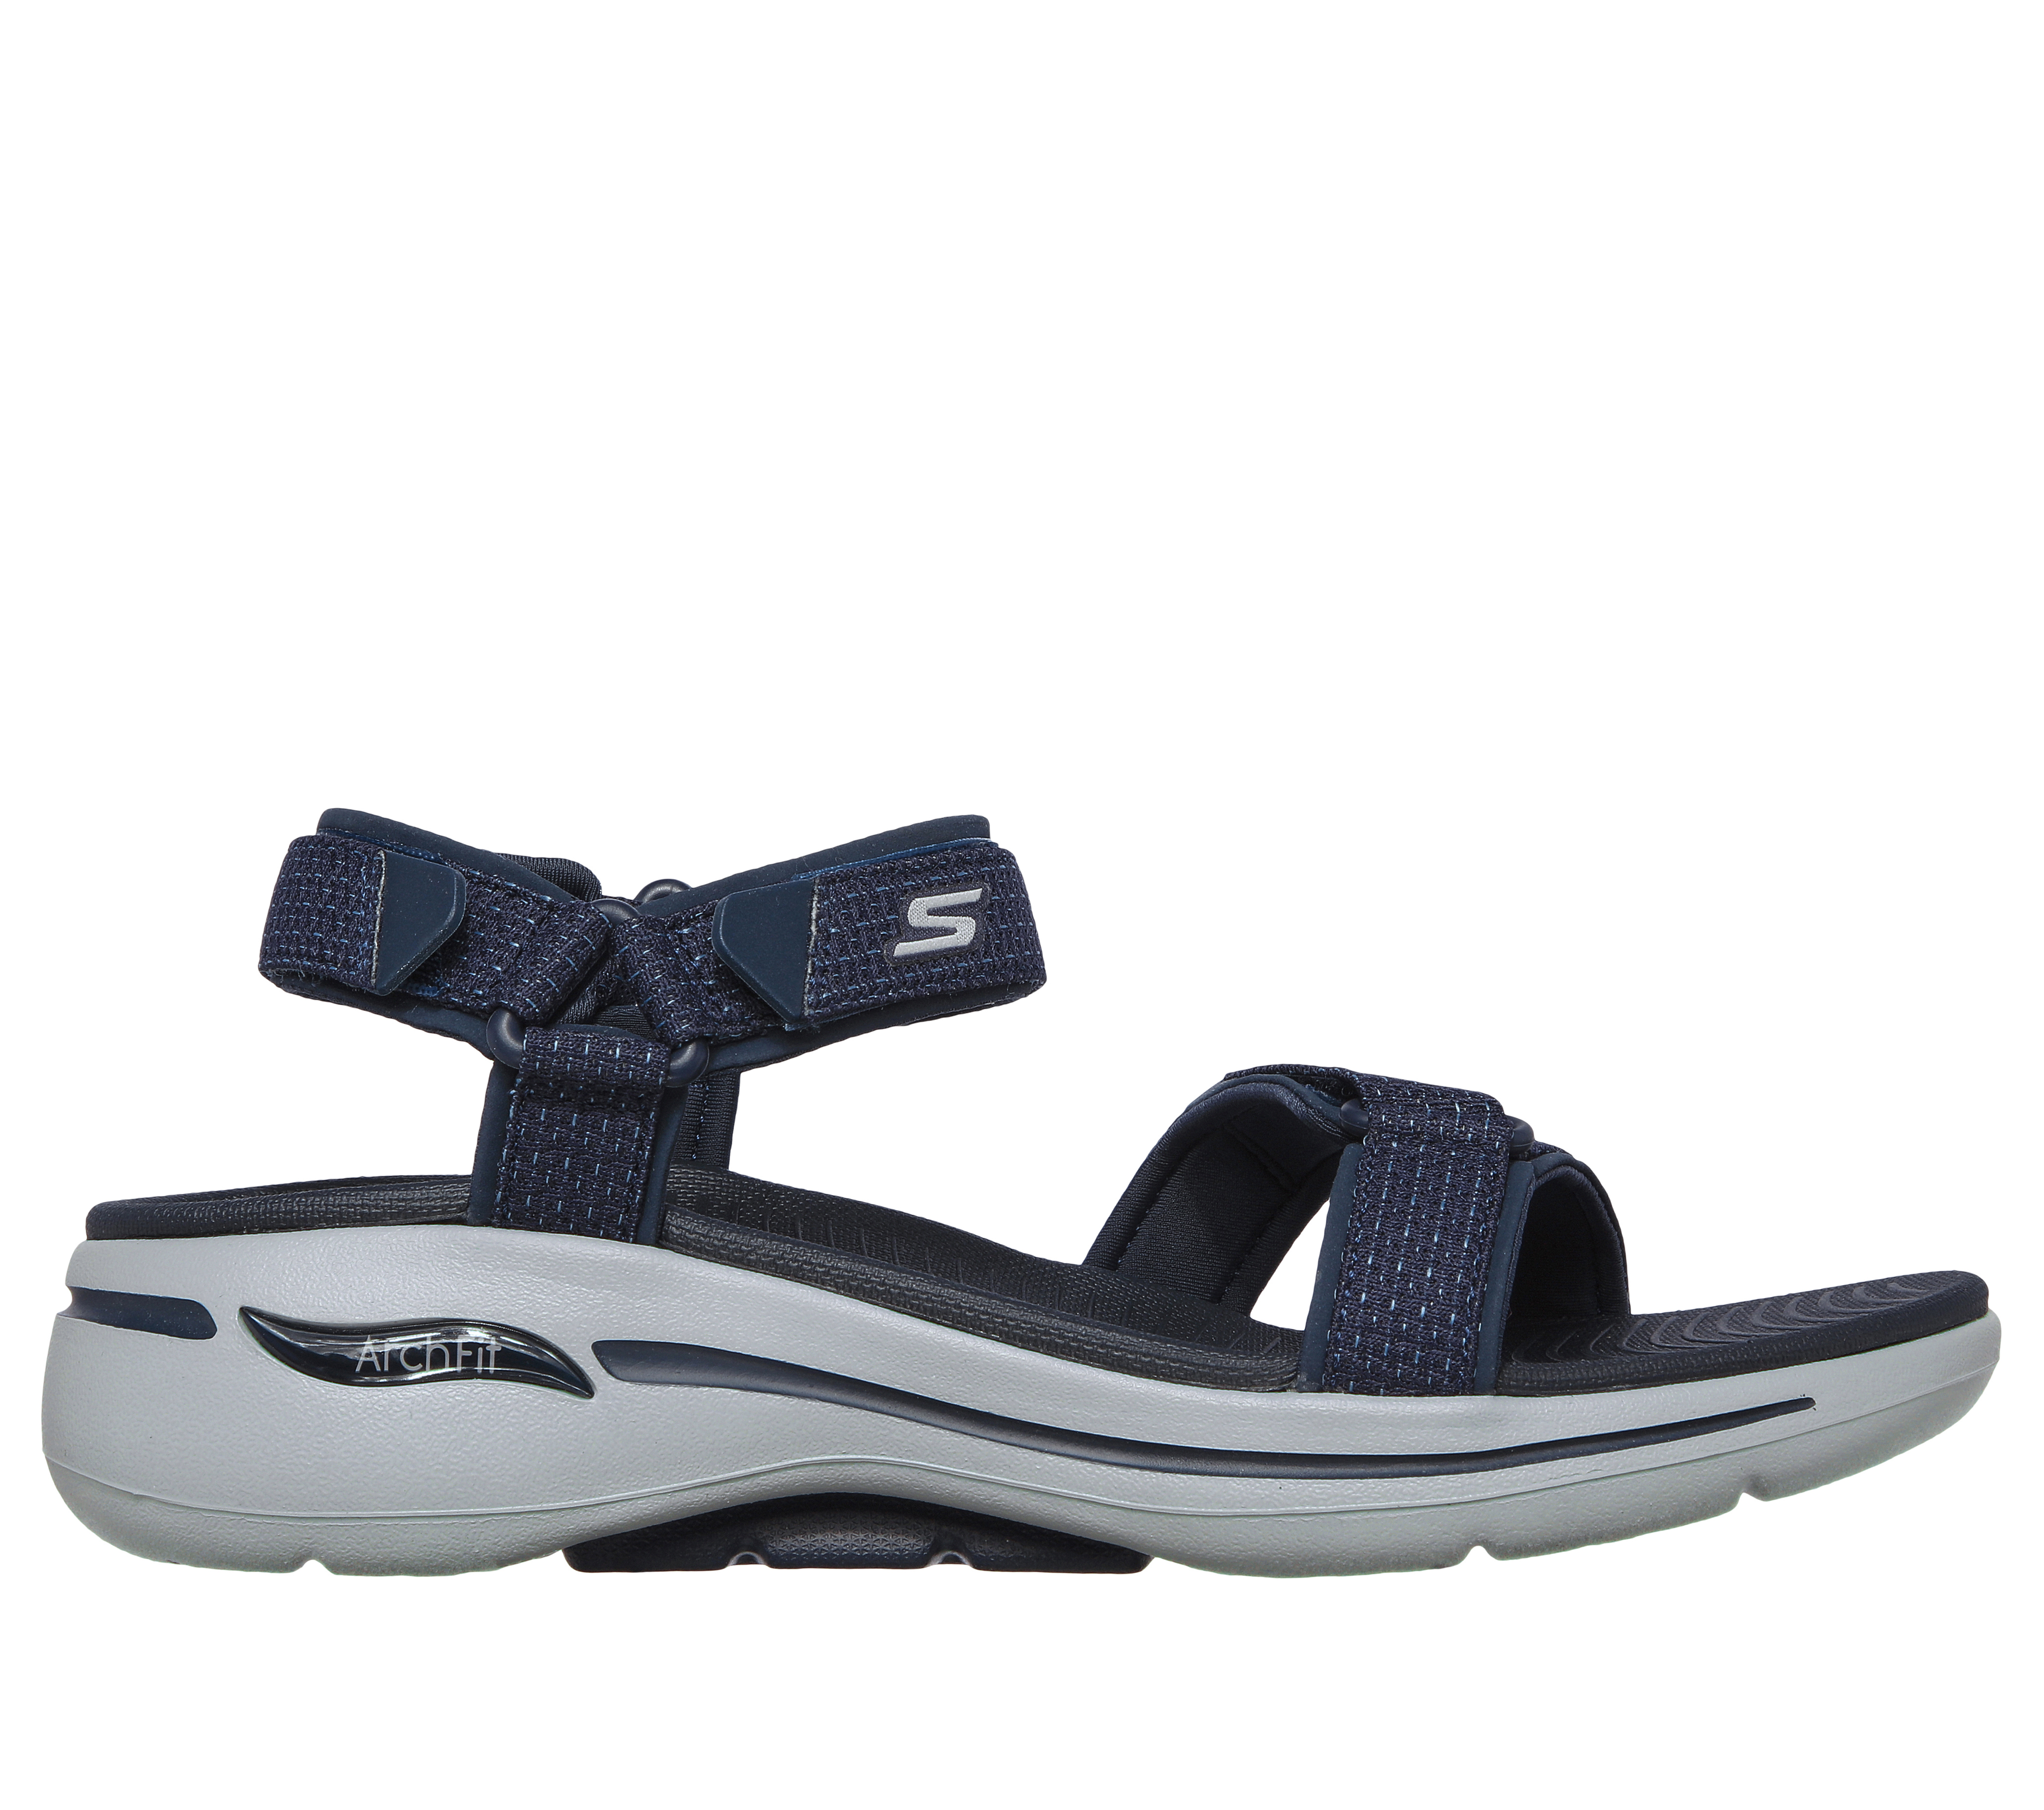 Shop the Arch Fit - Cruise Around SKECHERS